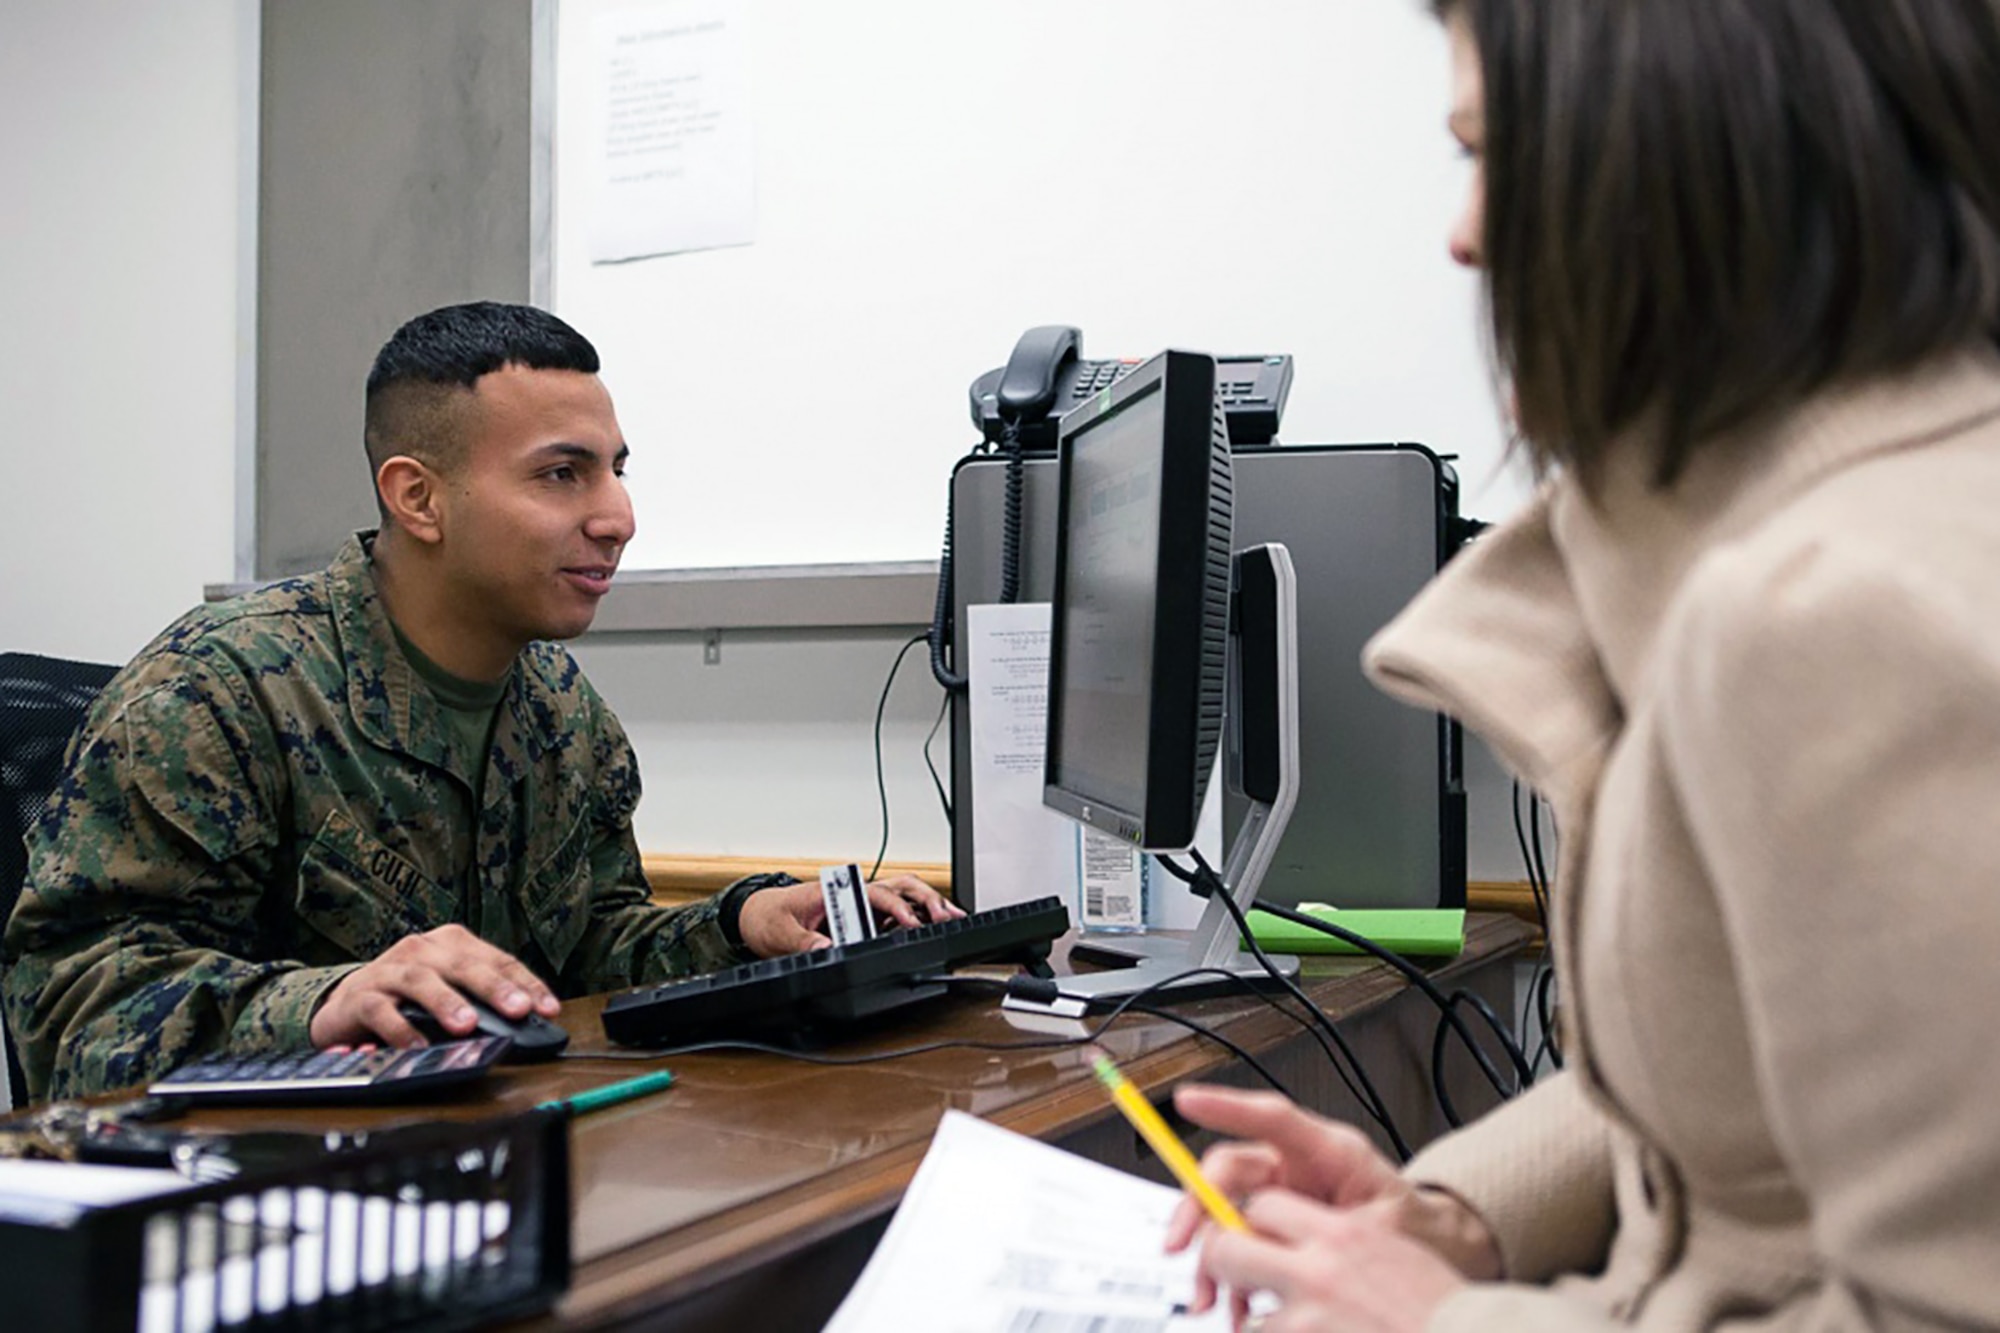 Tax services for the military — also known as MilTax — is DOD's approved tax-filing and tax-support service — including tax preparation and e-filing software and personalized support to deal with issues such as deployments, combat and training pay, housing and rentals, multistate filings, and living overseas.